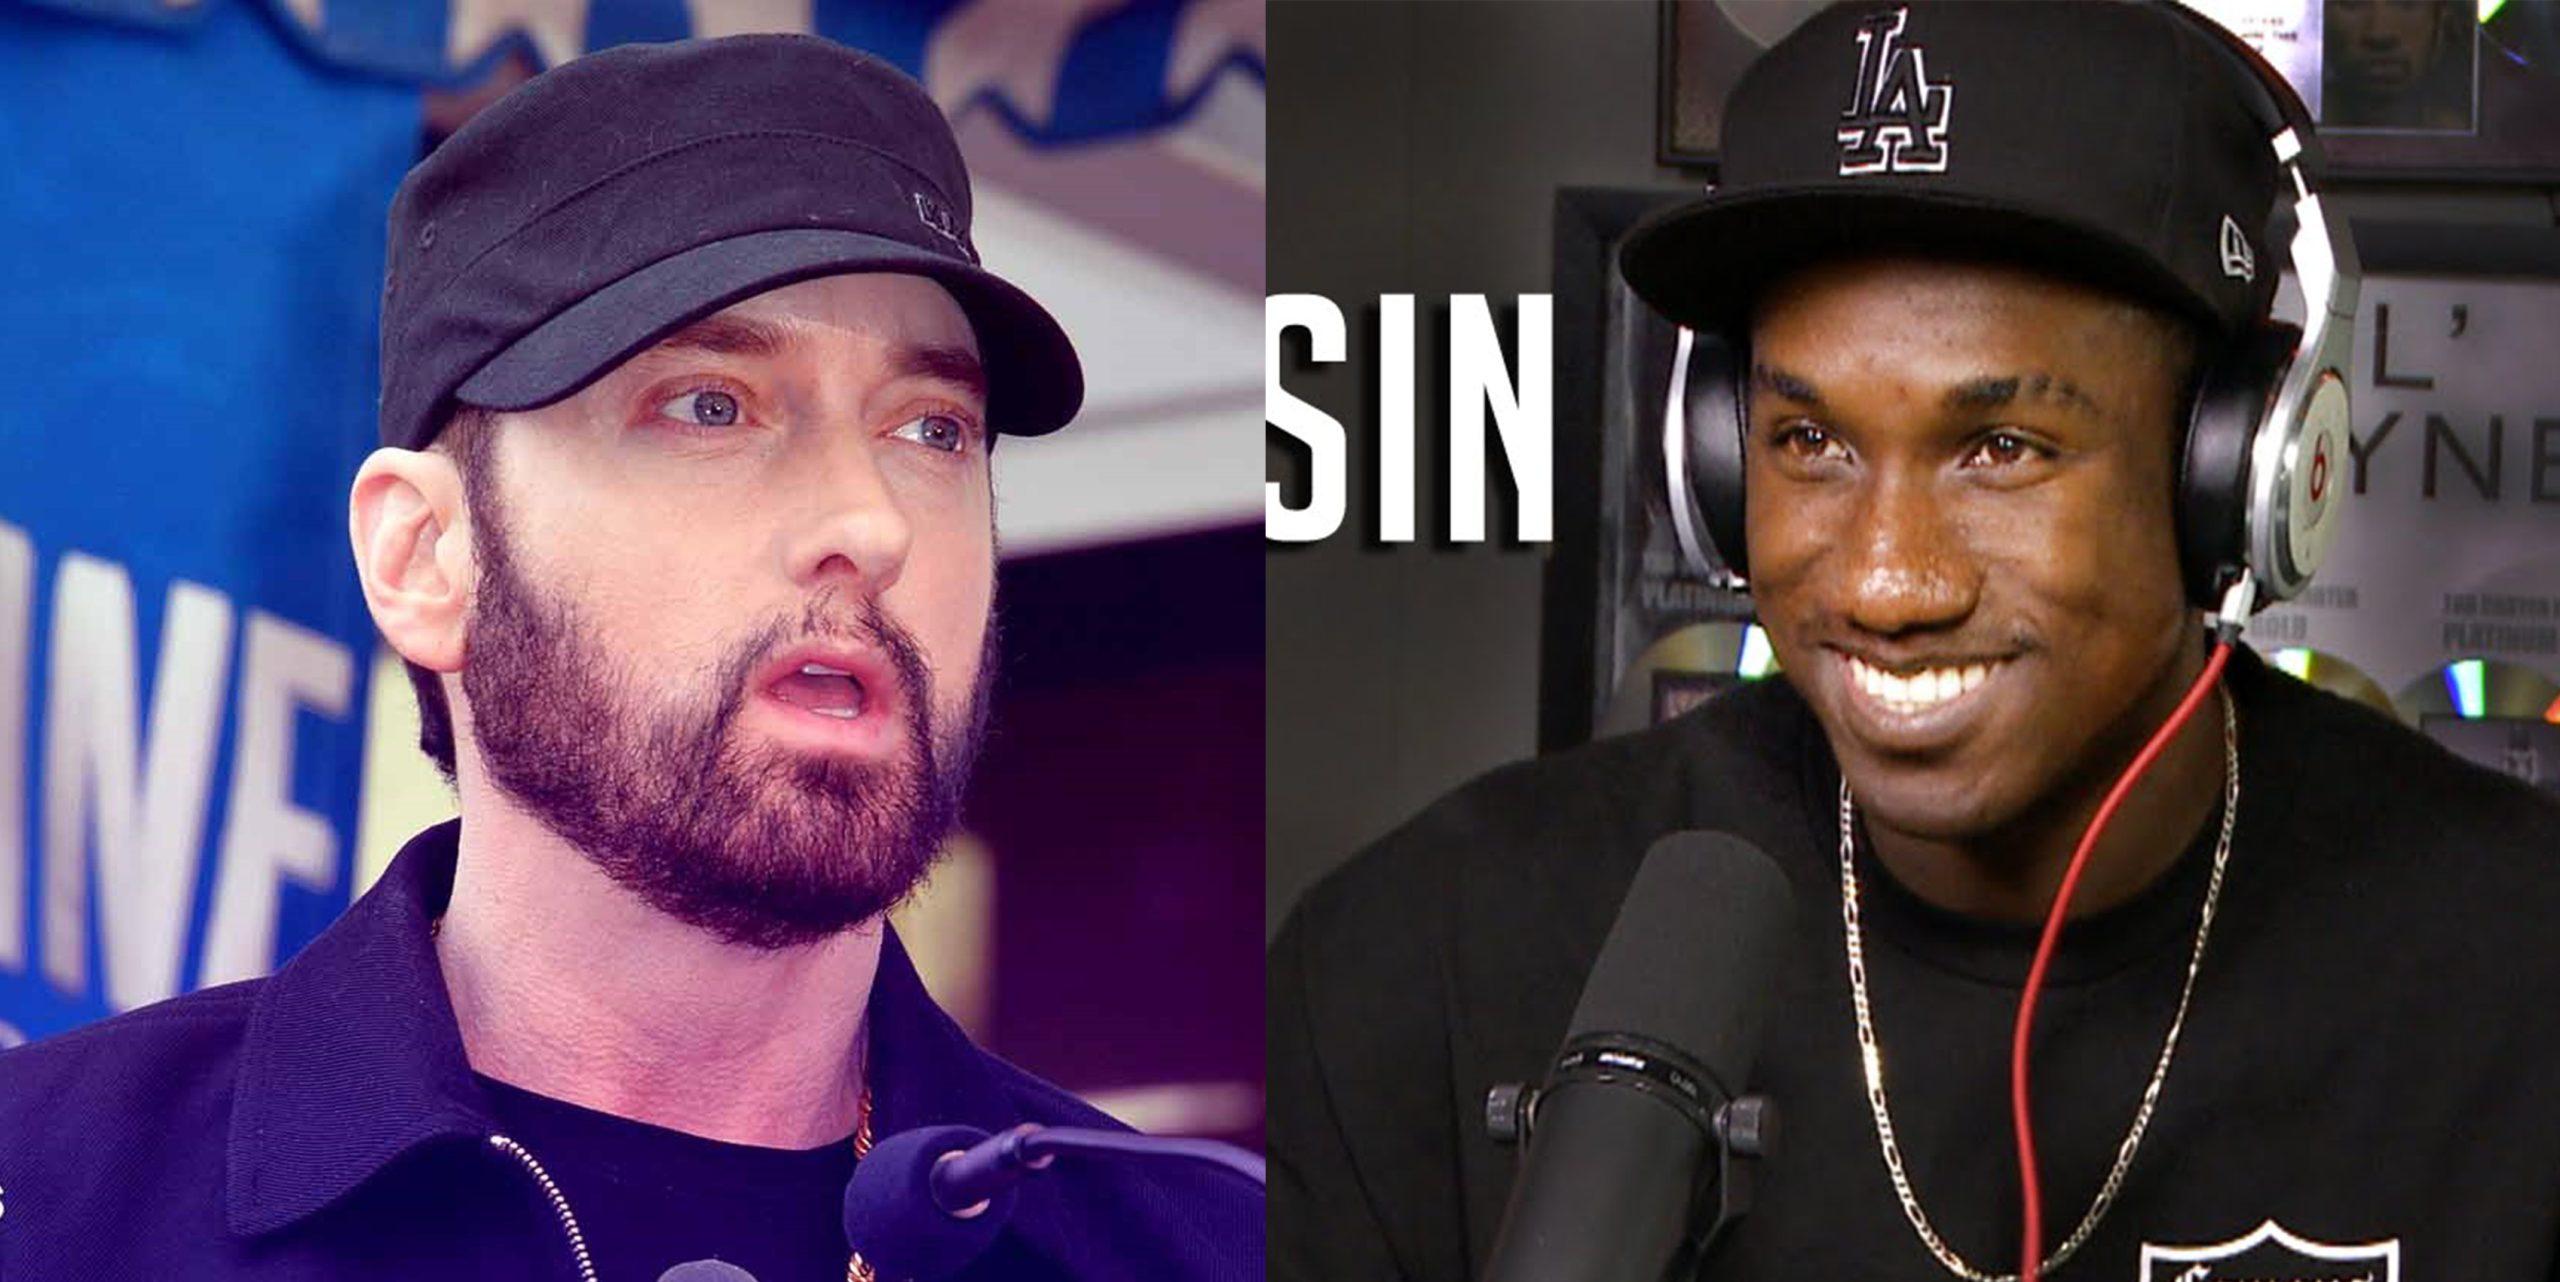 Hopsin has few questions about Eminem namedropping him on "Fall"